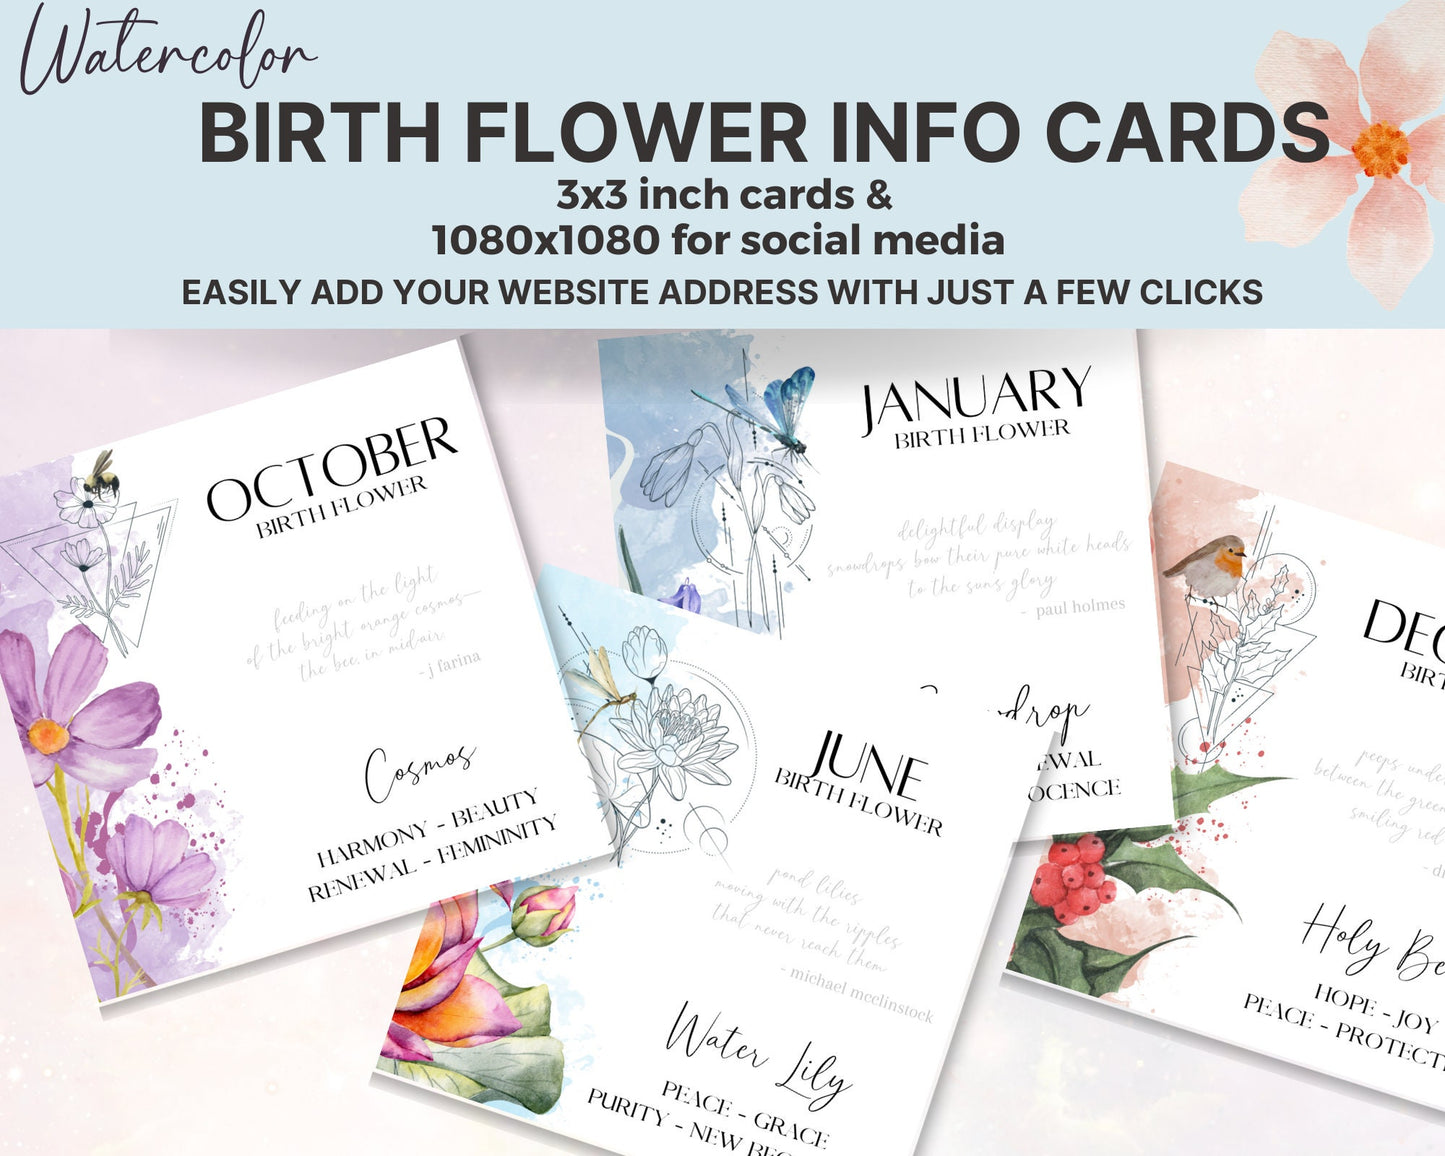 Birth Flower Cards - Watercolor Birth Flower Meaning Cards, Month of the Year Birth Flower Info Cards in Canva, Birth Flower Jewelry Inserts